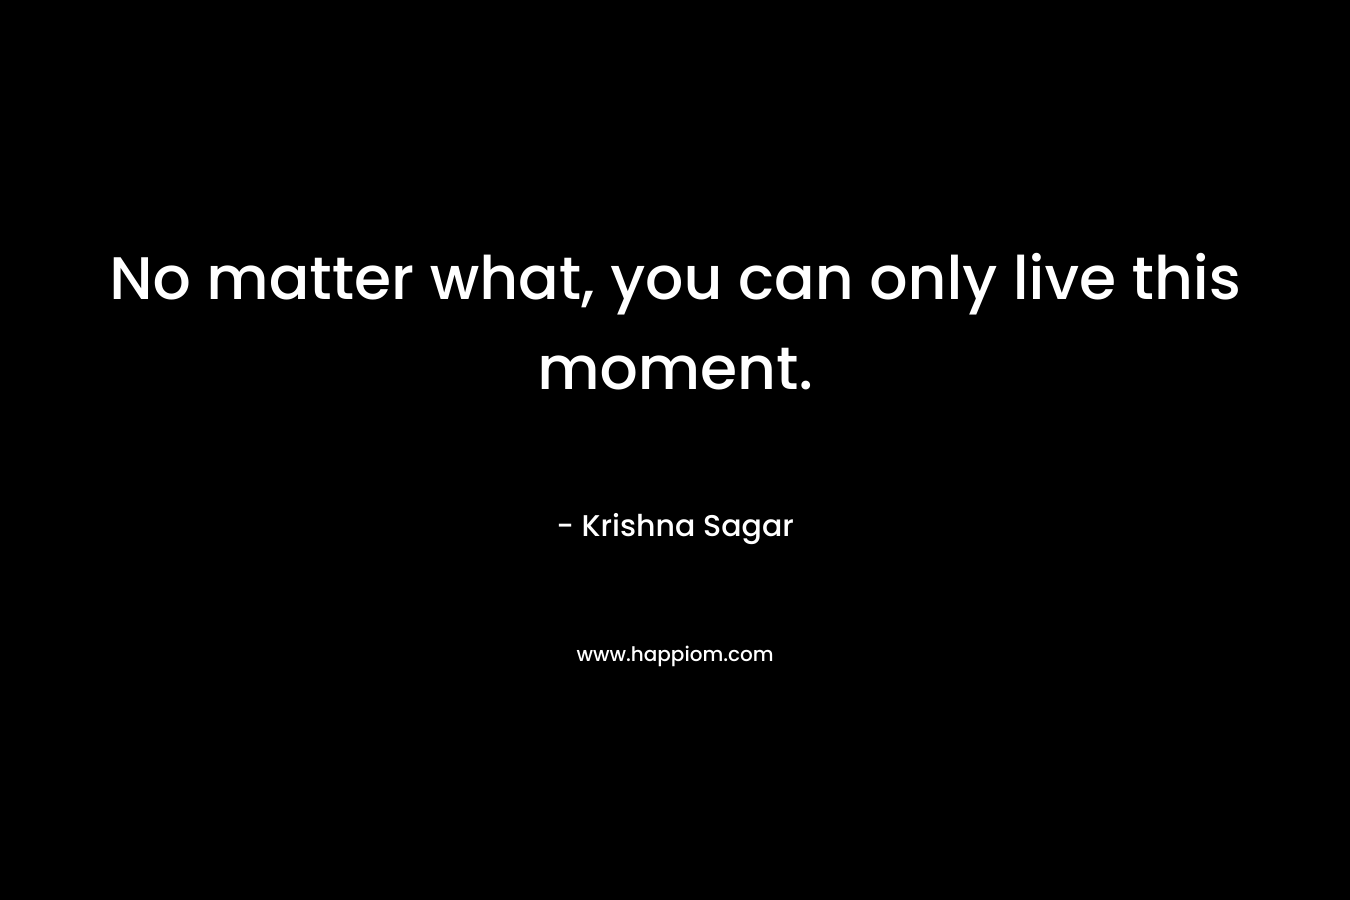 No matter what, you can only live this moment.